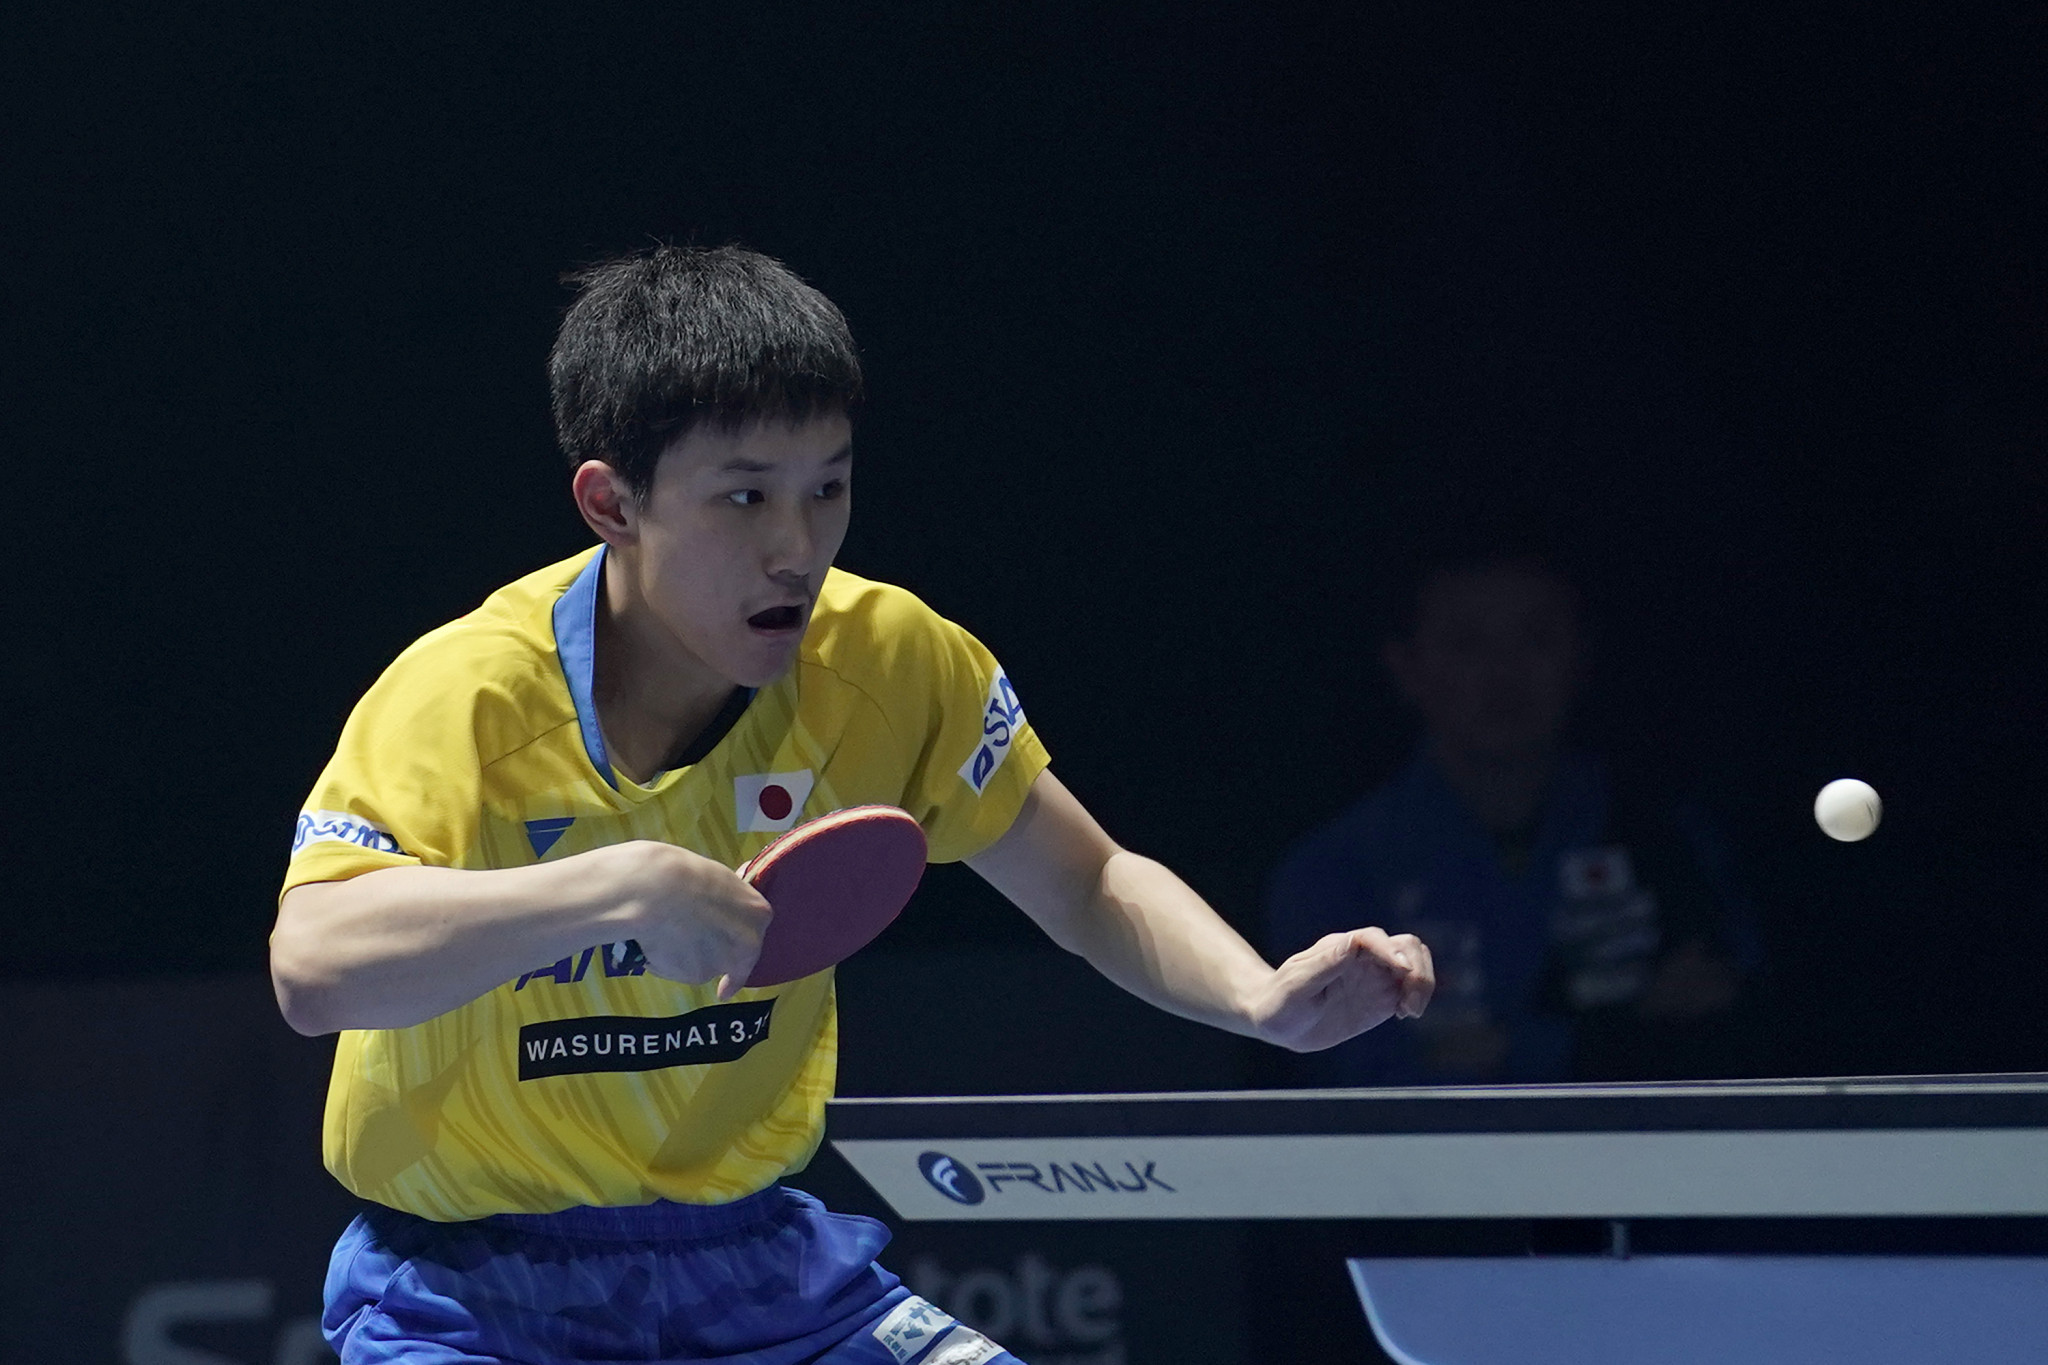 Tomokazu Harimoto played in his first competition since the suspension of sport ©Getty Images